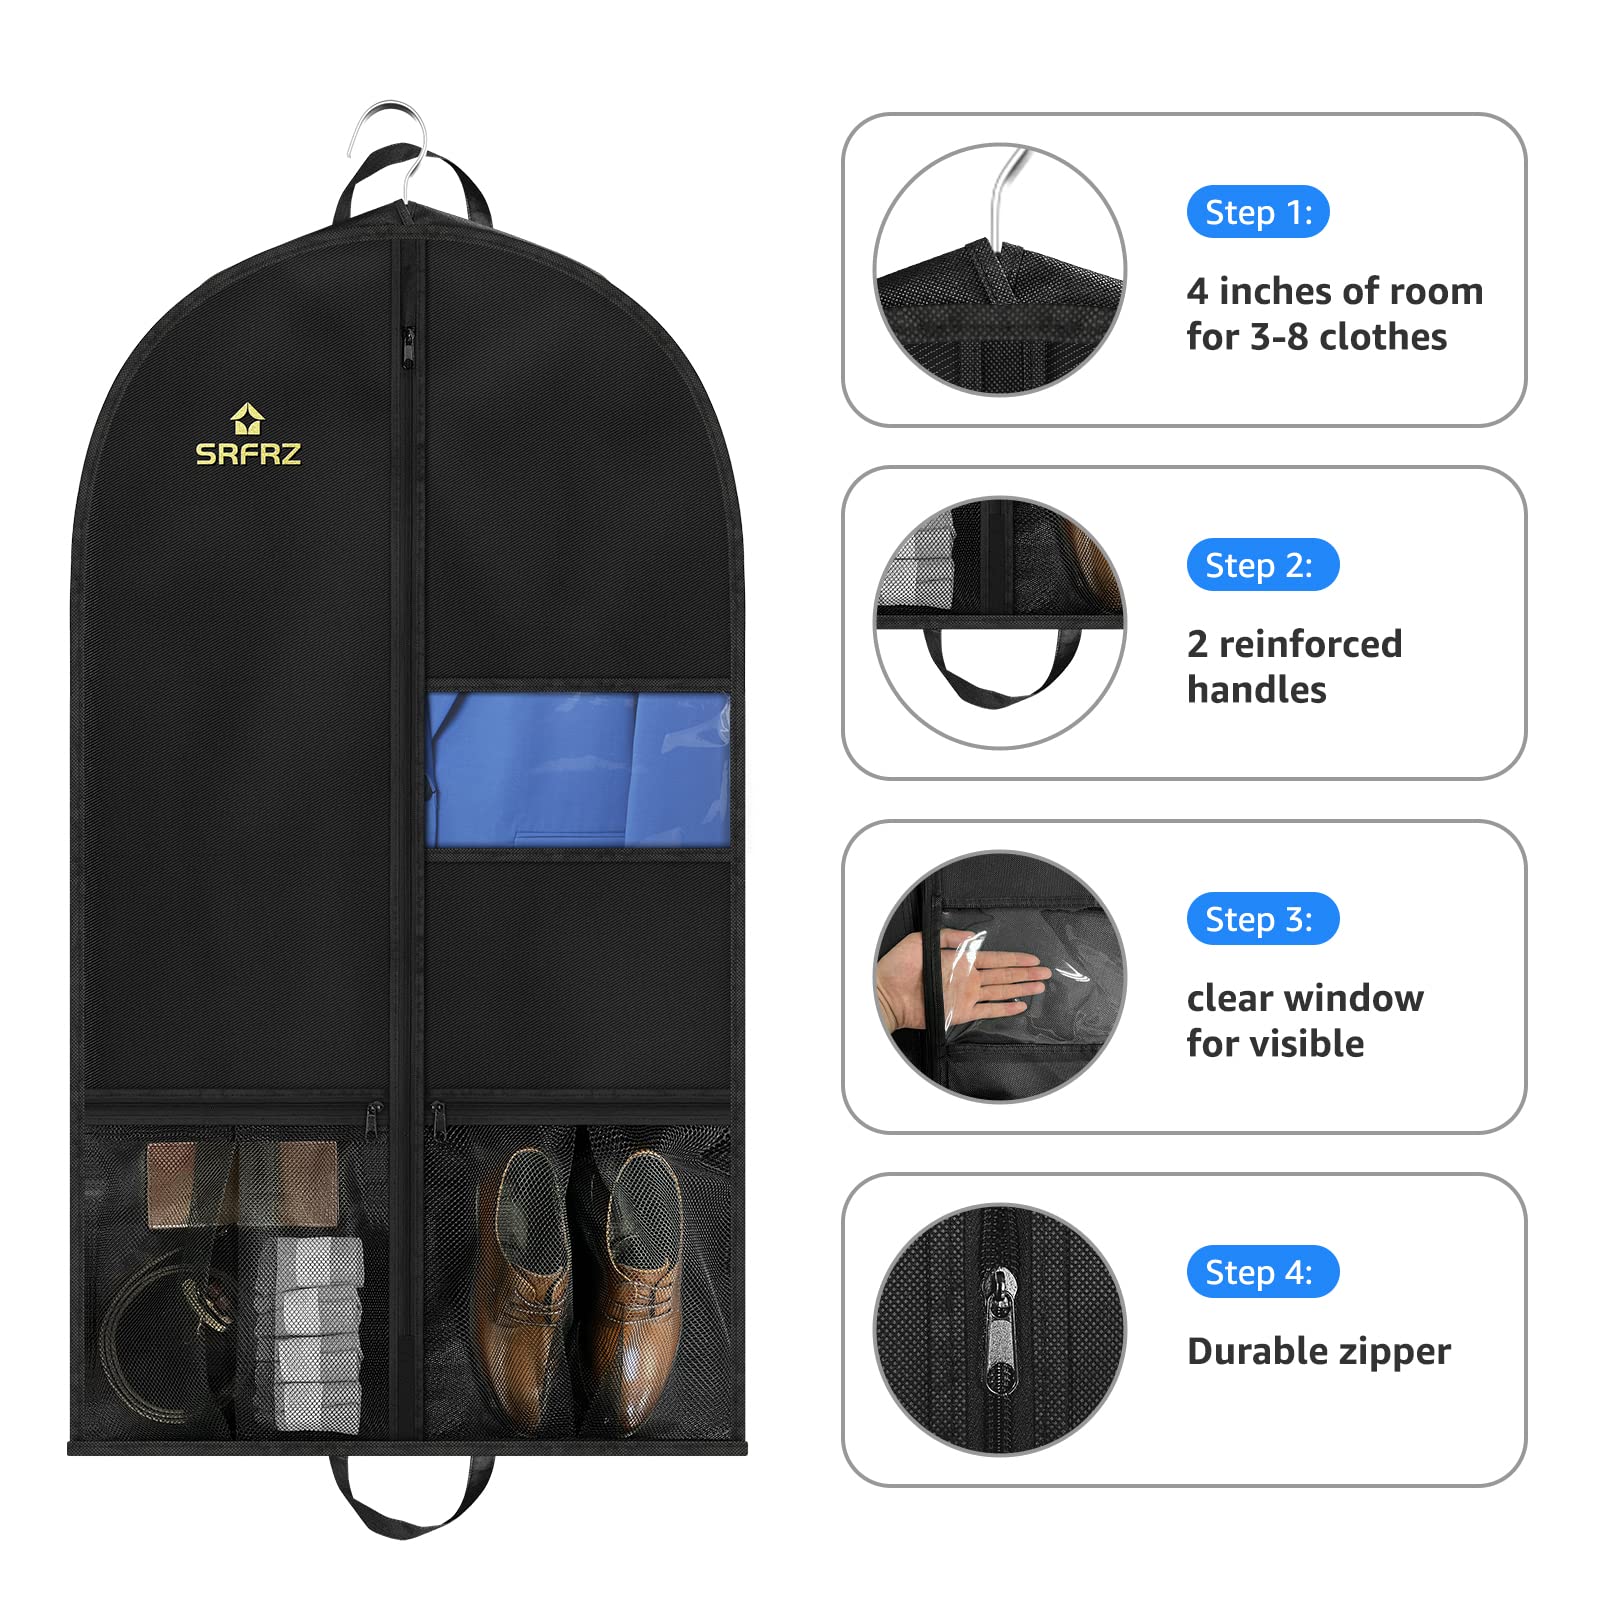 SRFRZ 43" Heavy Duty Garment Bags Suit Bags for Travel Hanging Clothes, 4" Gussetes with Pockets and 2 Handles, Protector for Coat Dress Jacket Shirts